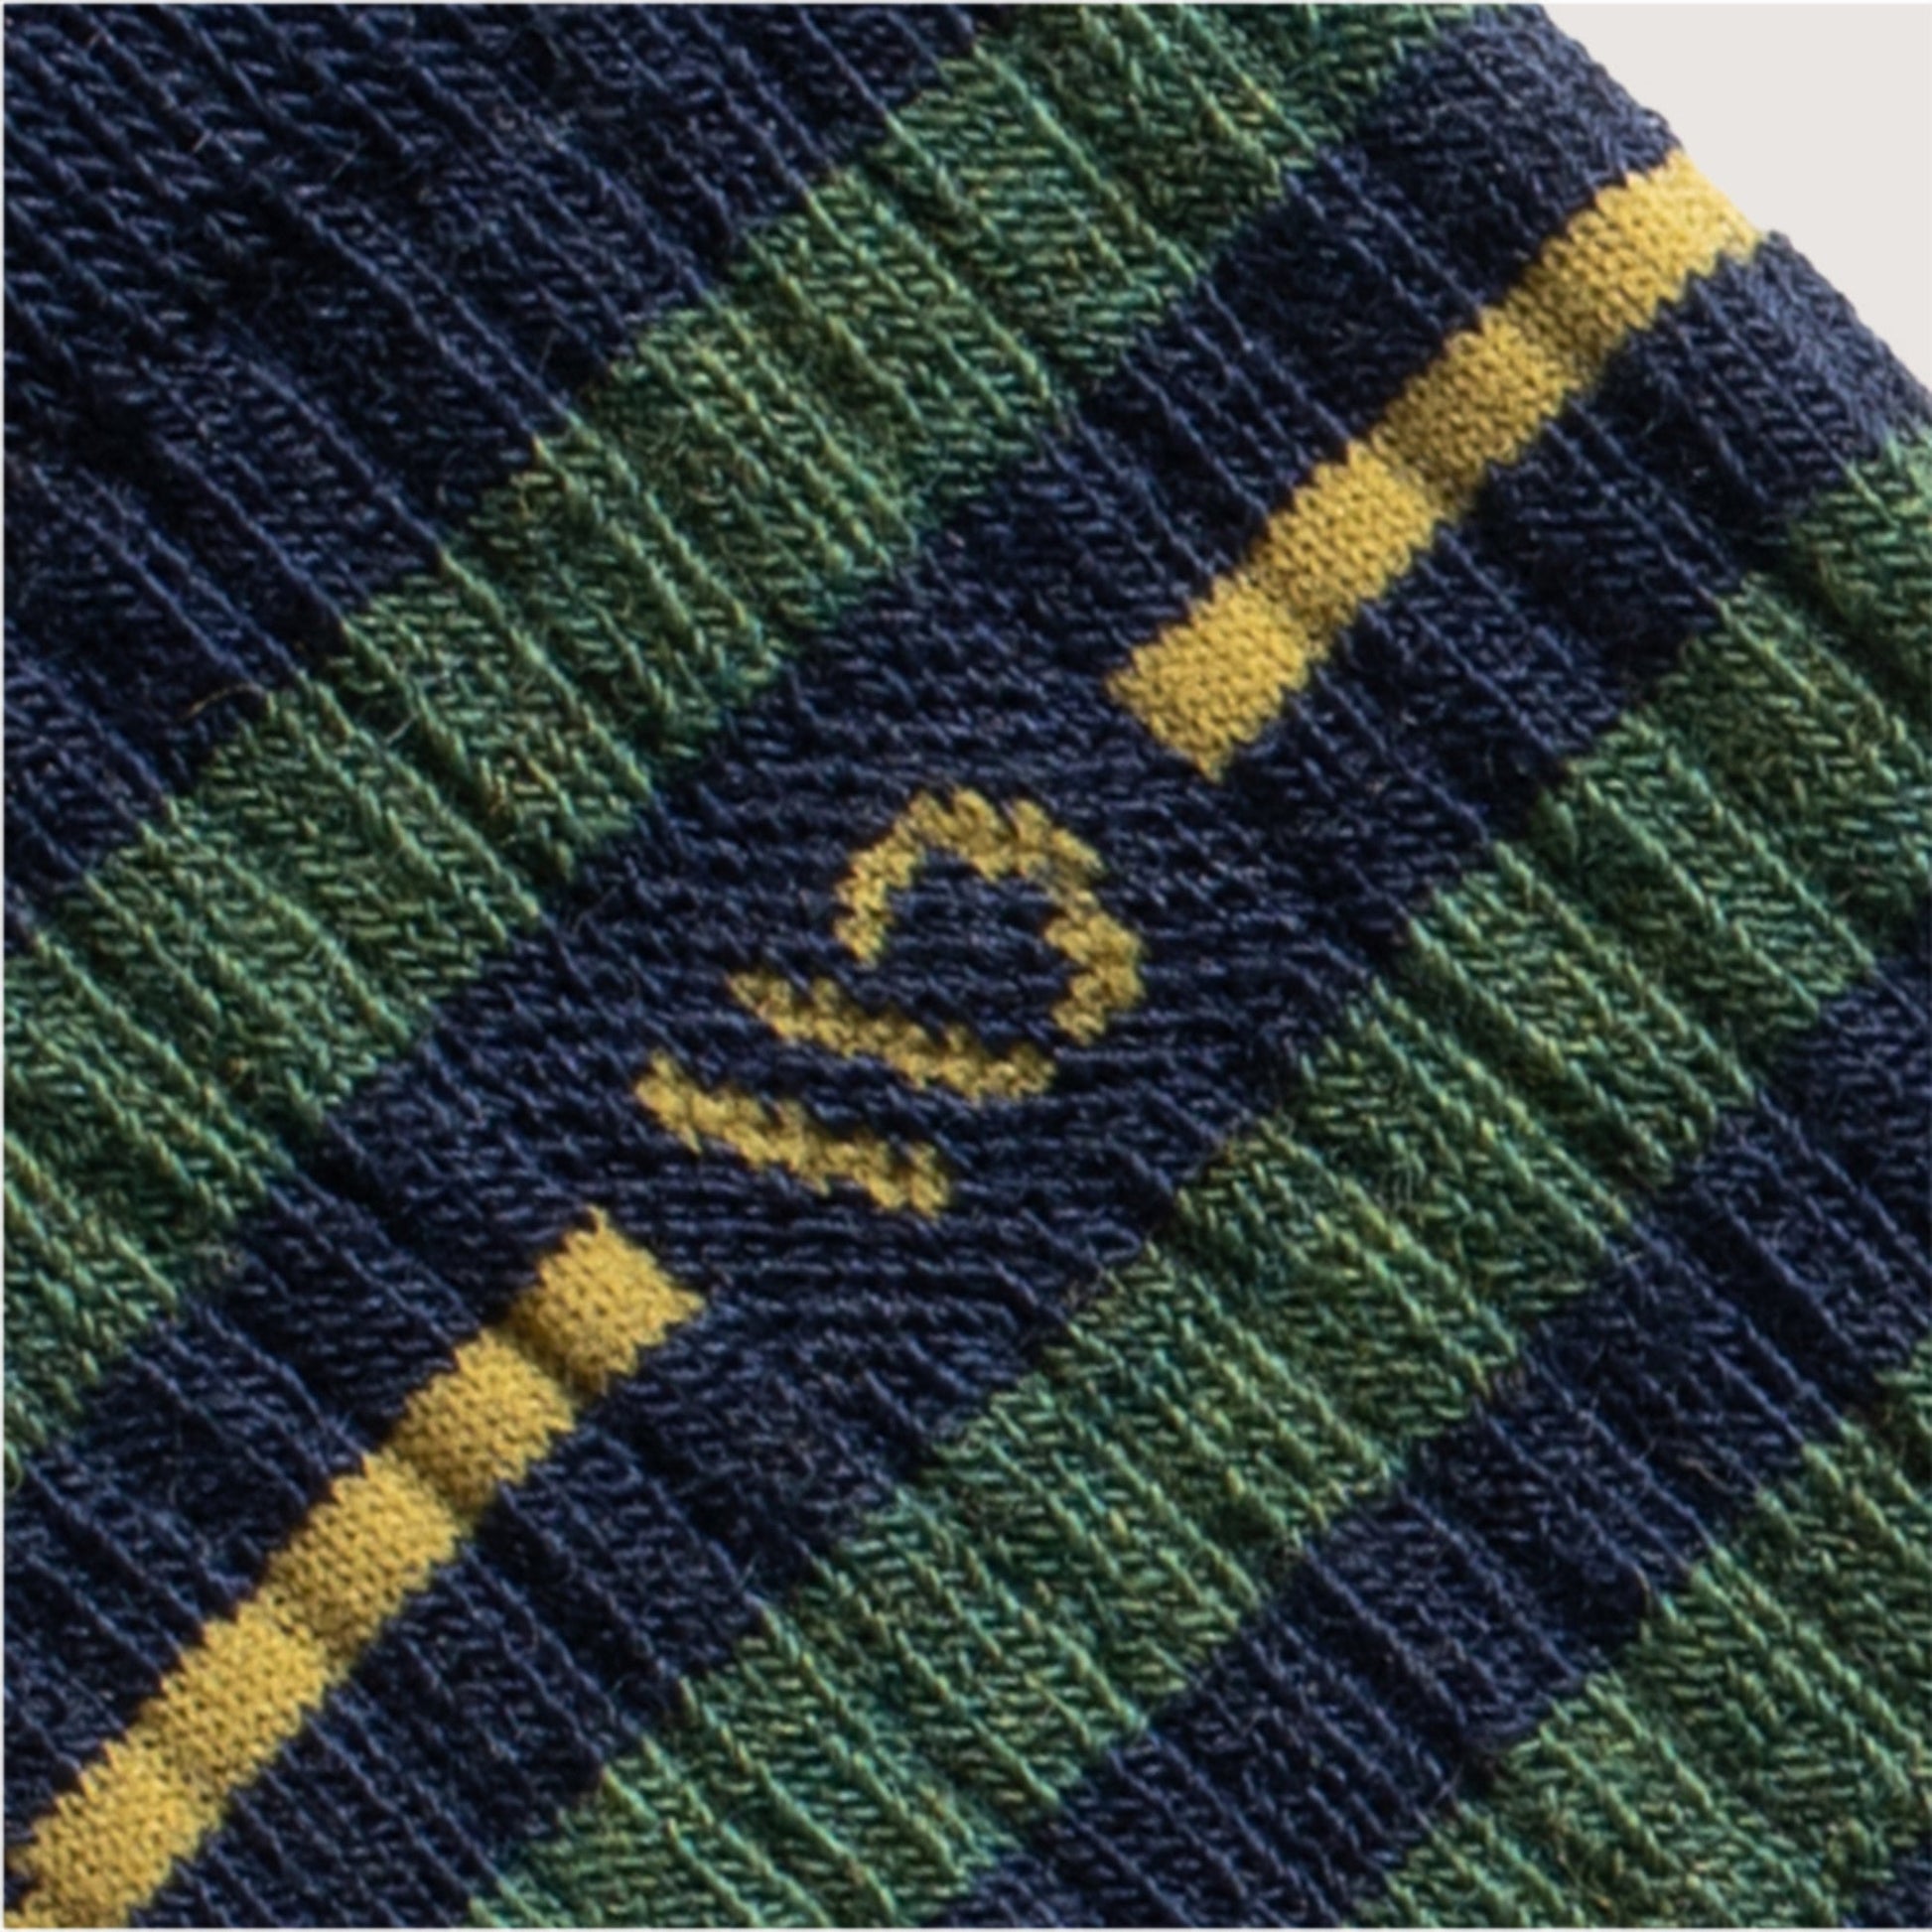 Detail featuring a yellow logo and stripe, with wider denim and green stripes --Light Gray/Denim/Forest